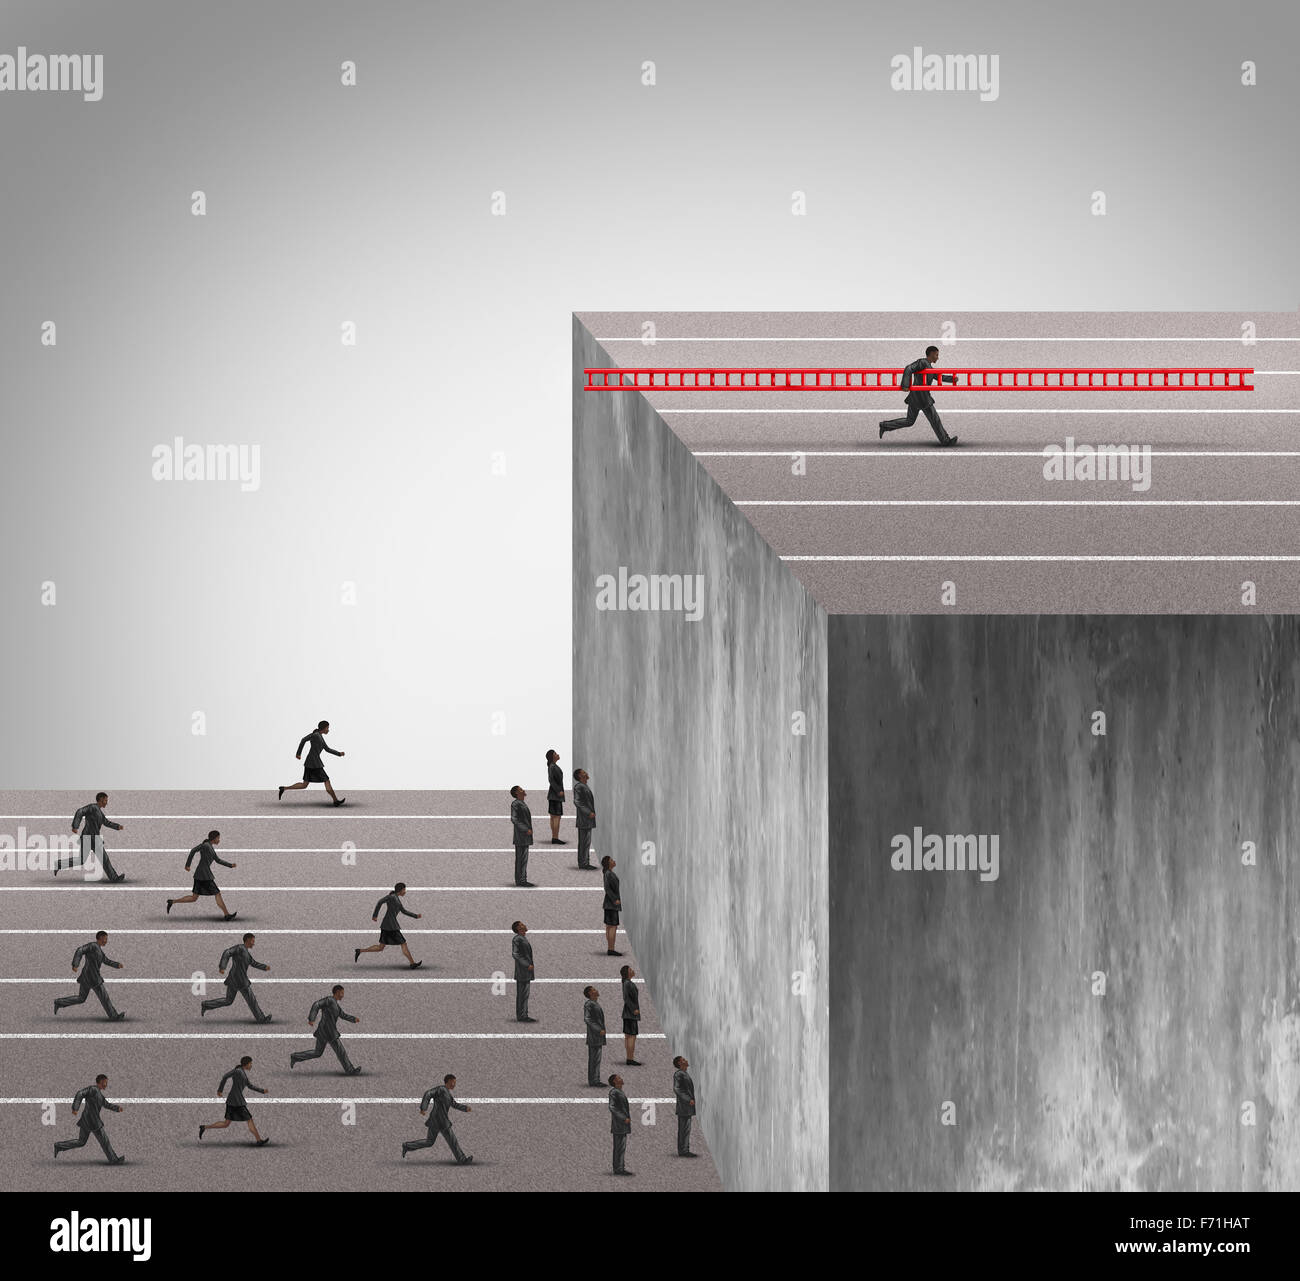 Business innovation advantage concept as a group of businesspeople running into a high wall obstacle with one clever competitive businessman using a ladder to climb and carrying the tool with him to deny the competition of opportunity. Stock Photo